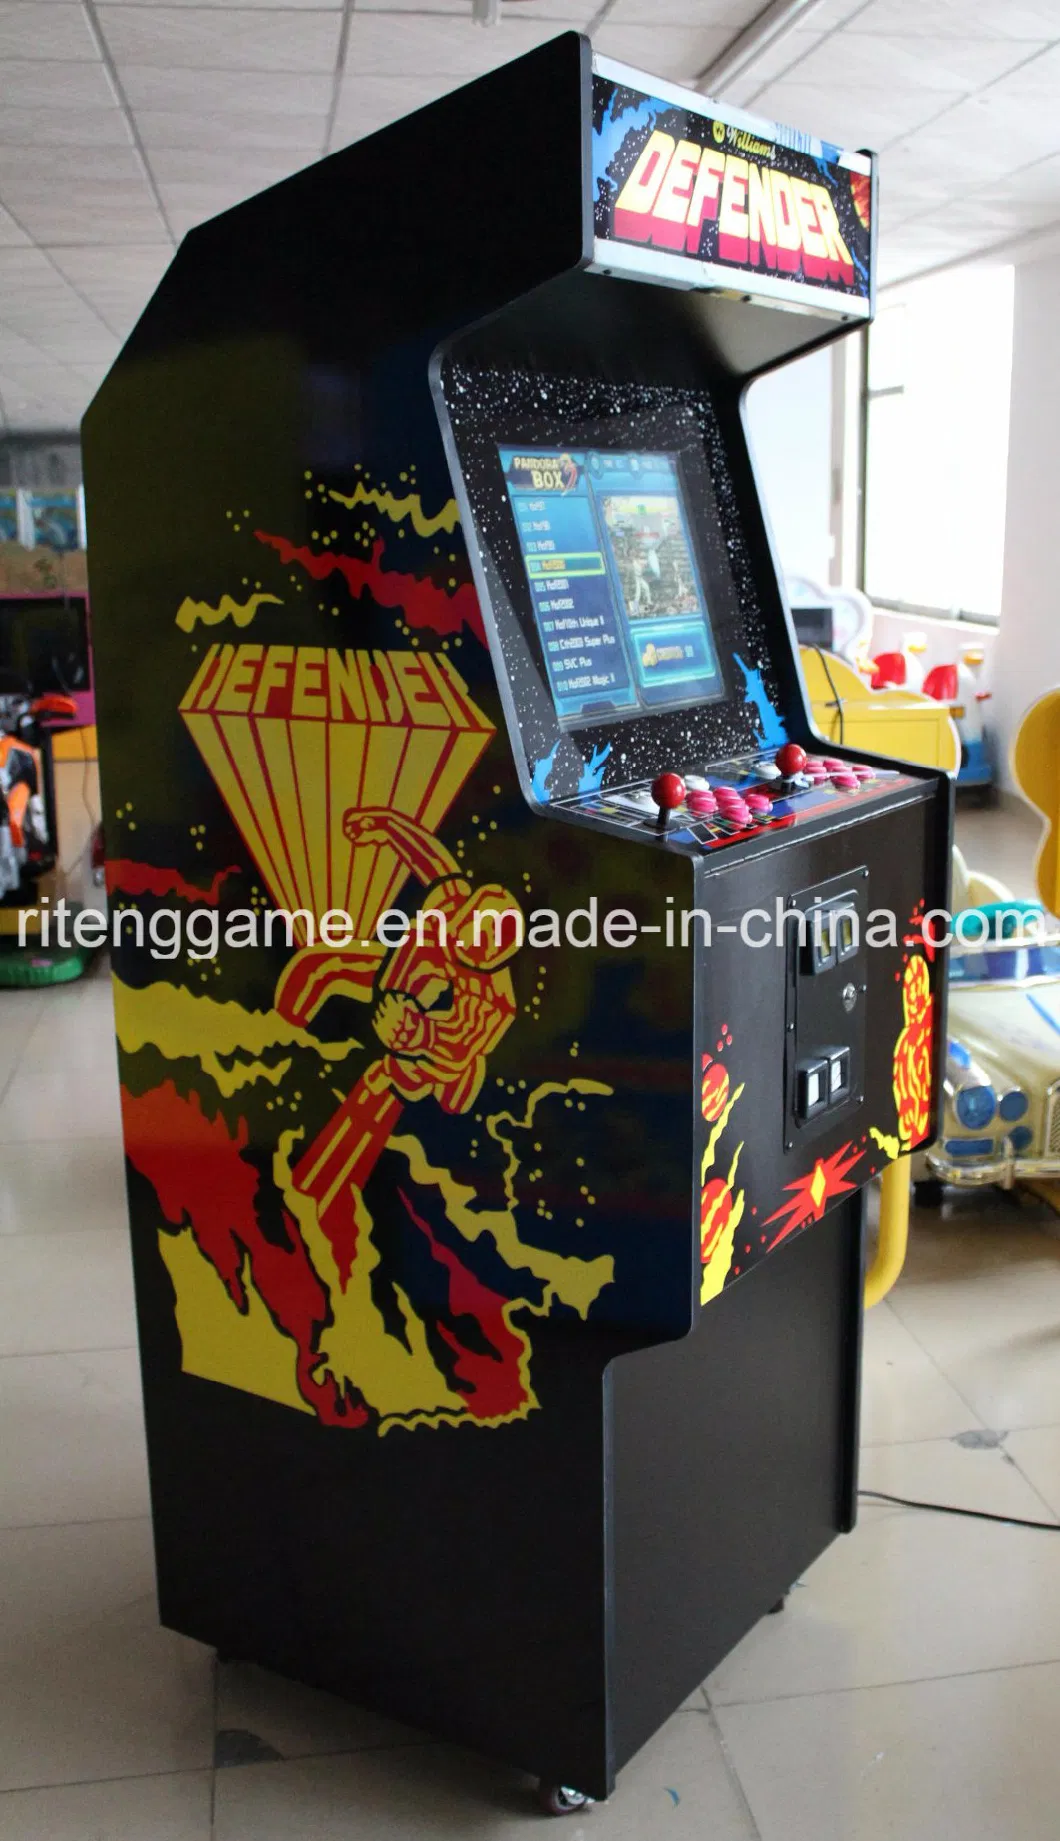 19 Inch LCD 2 Player 520in 1 Coin Operated Upright Arcade Games Machine Arcade Cabinet DIY Button Multi Game Defender Arcade Game Machines with Pandora Box